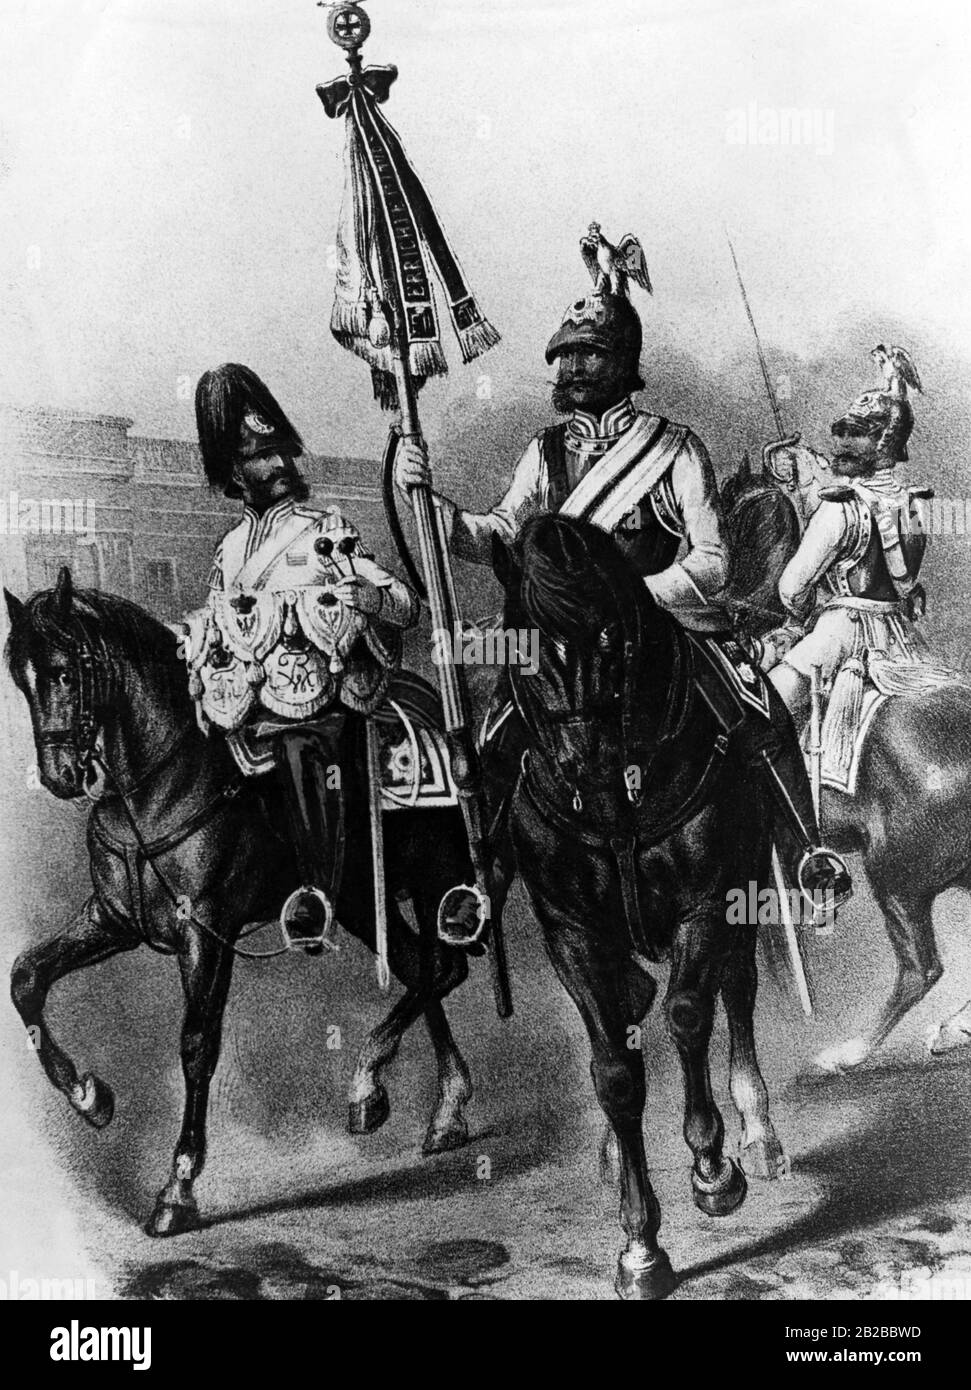 Among the most prestigious units of the Prussian army were the cuirassiers of the Garde-du-Corps stationed in Berlin, whose eagle-decorated helmets were often worn by Emperor Wilhelm II. The drawing shows a standard bearer and timpanist of this cavalry troop. Stock Photo